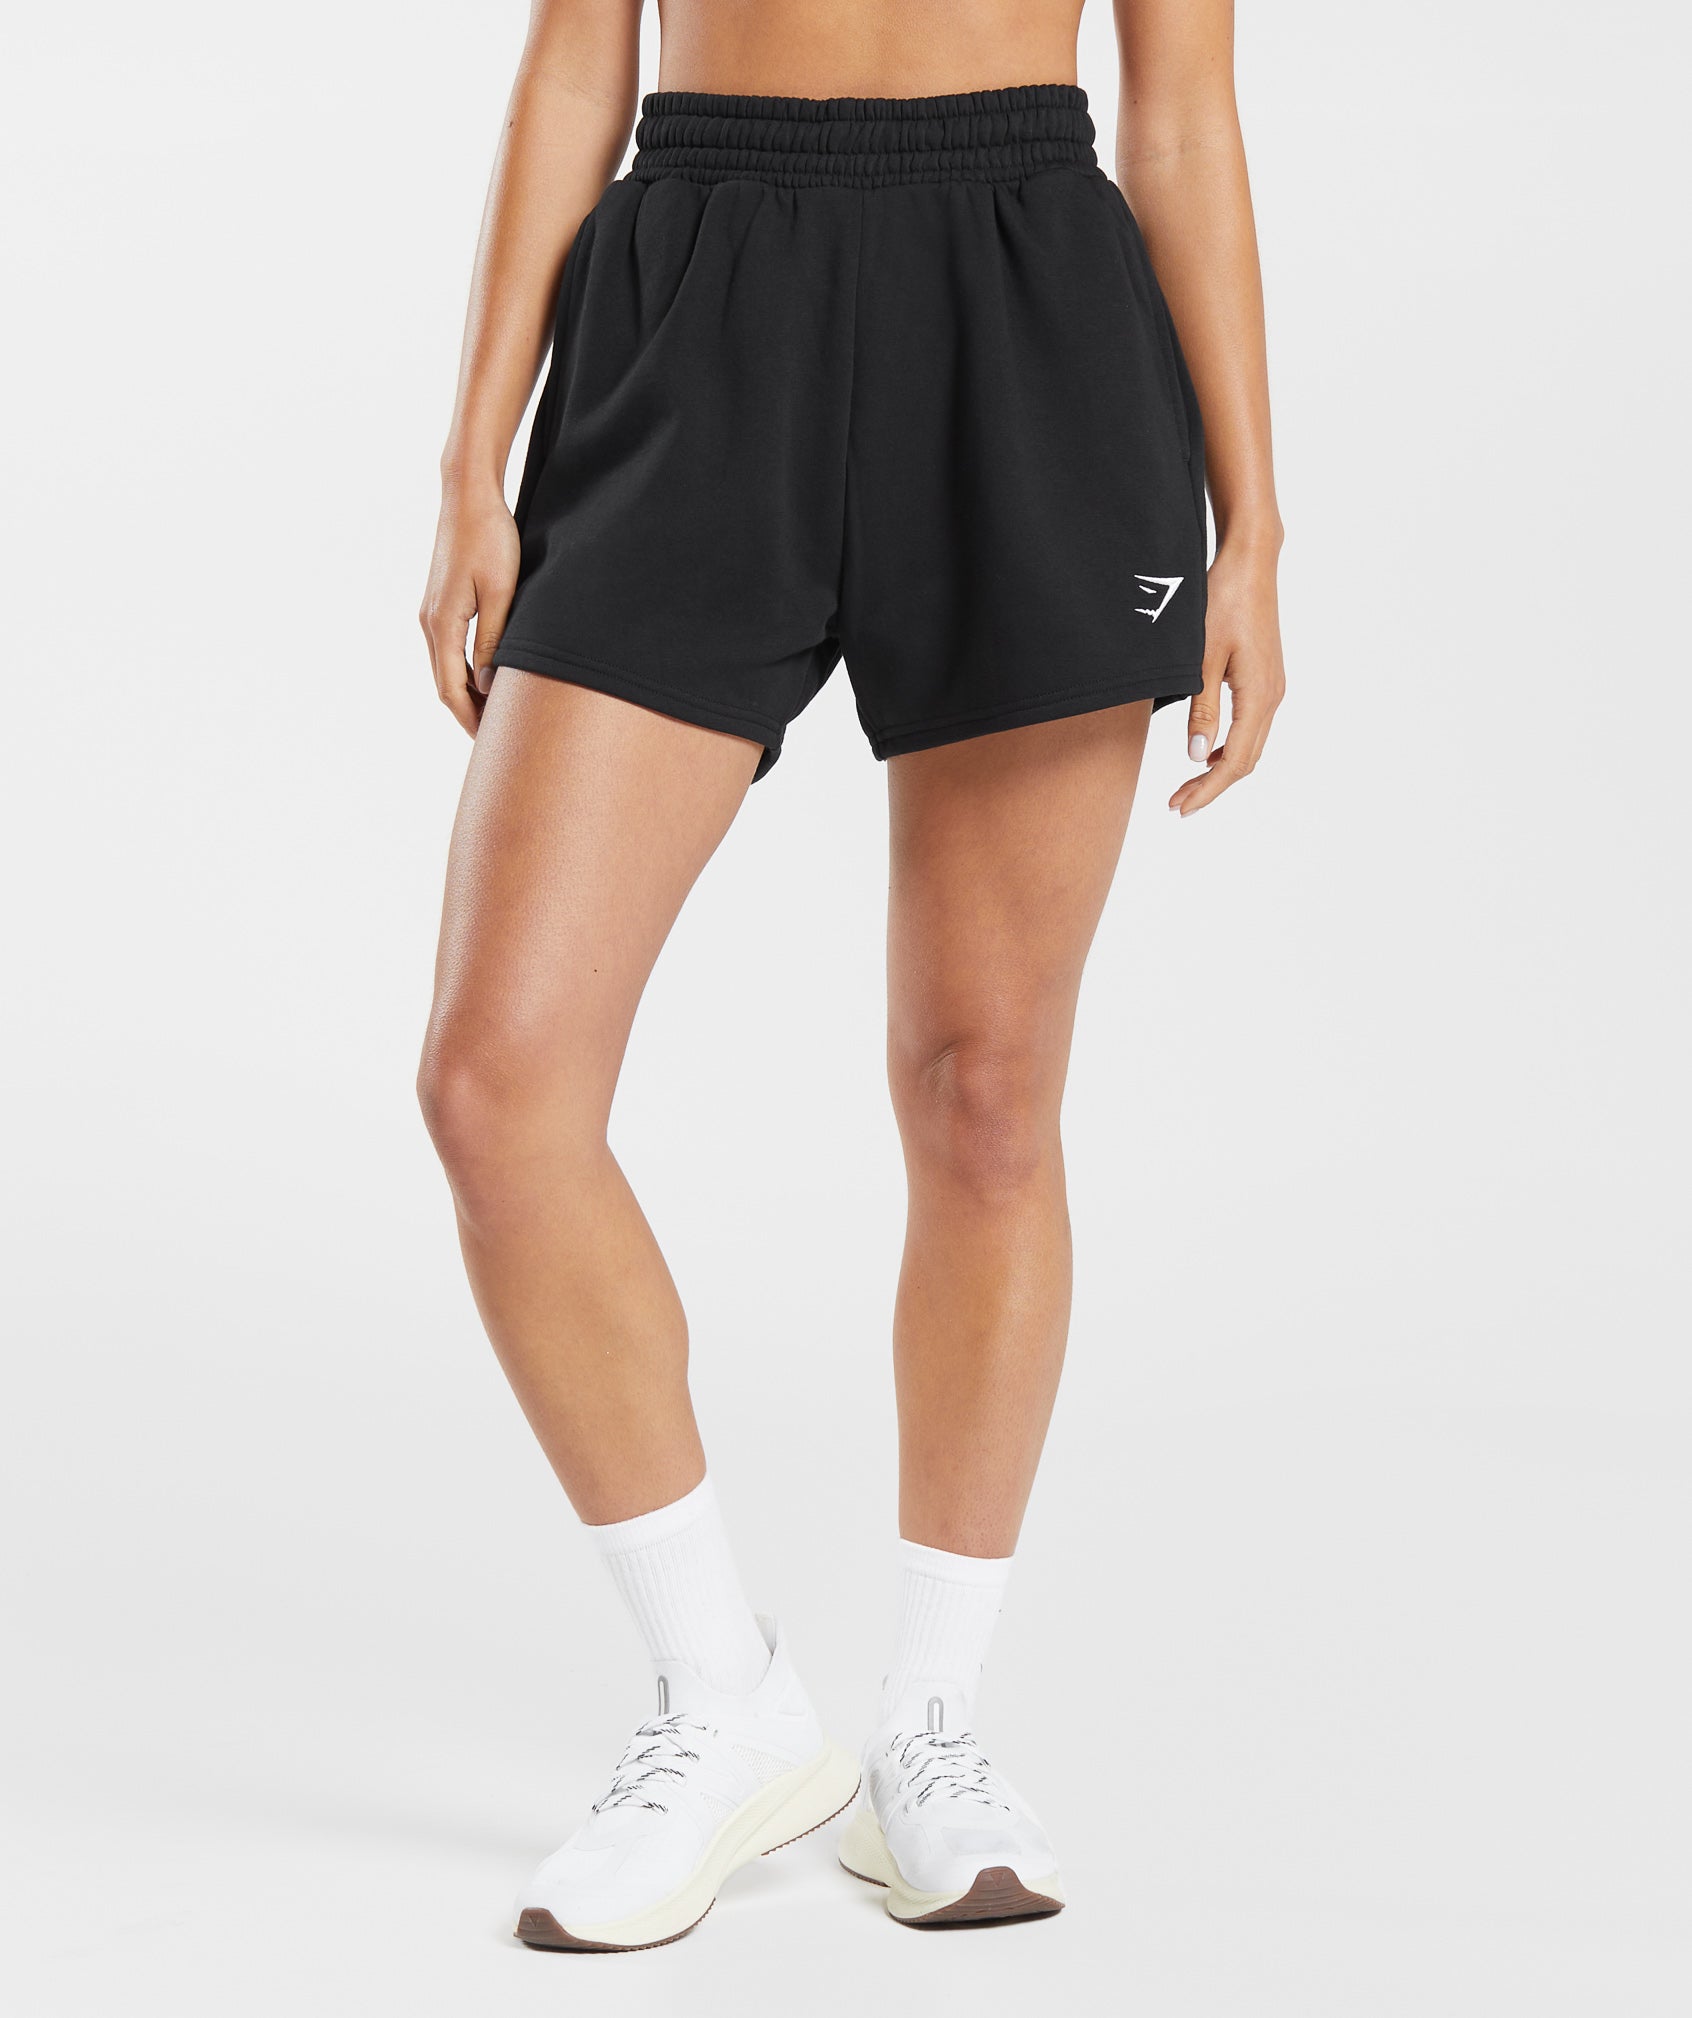 Women's Gym Shorts with Pockets – Gymshark